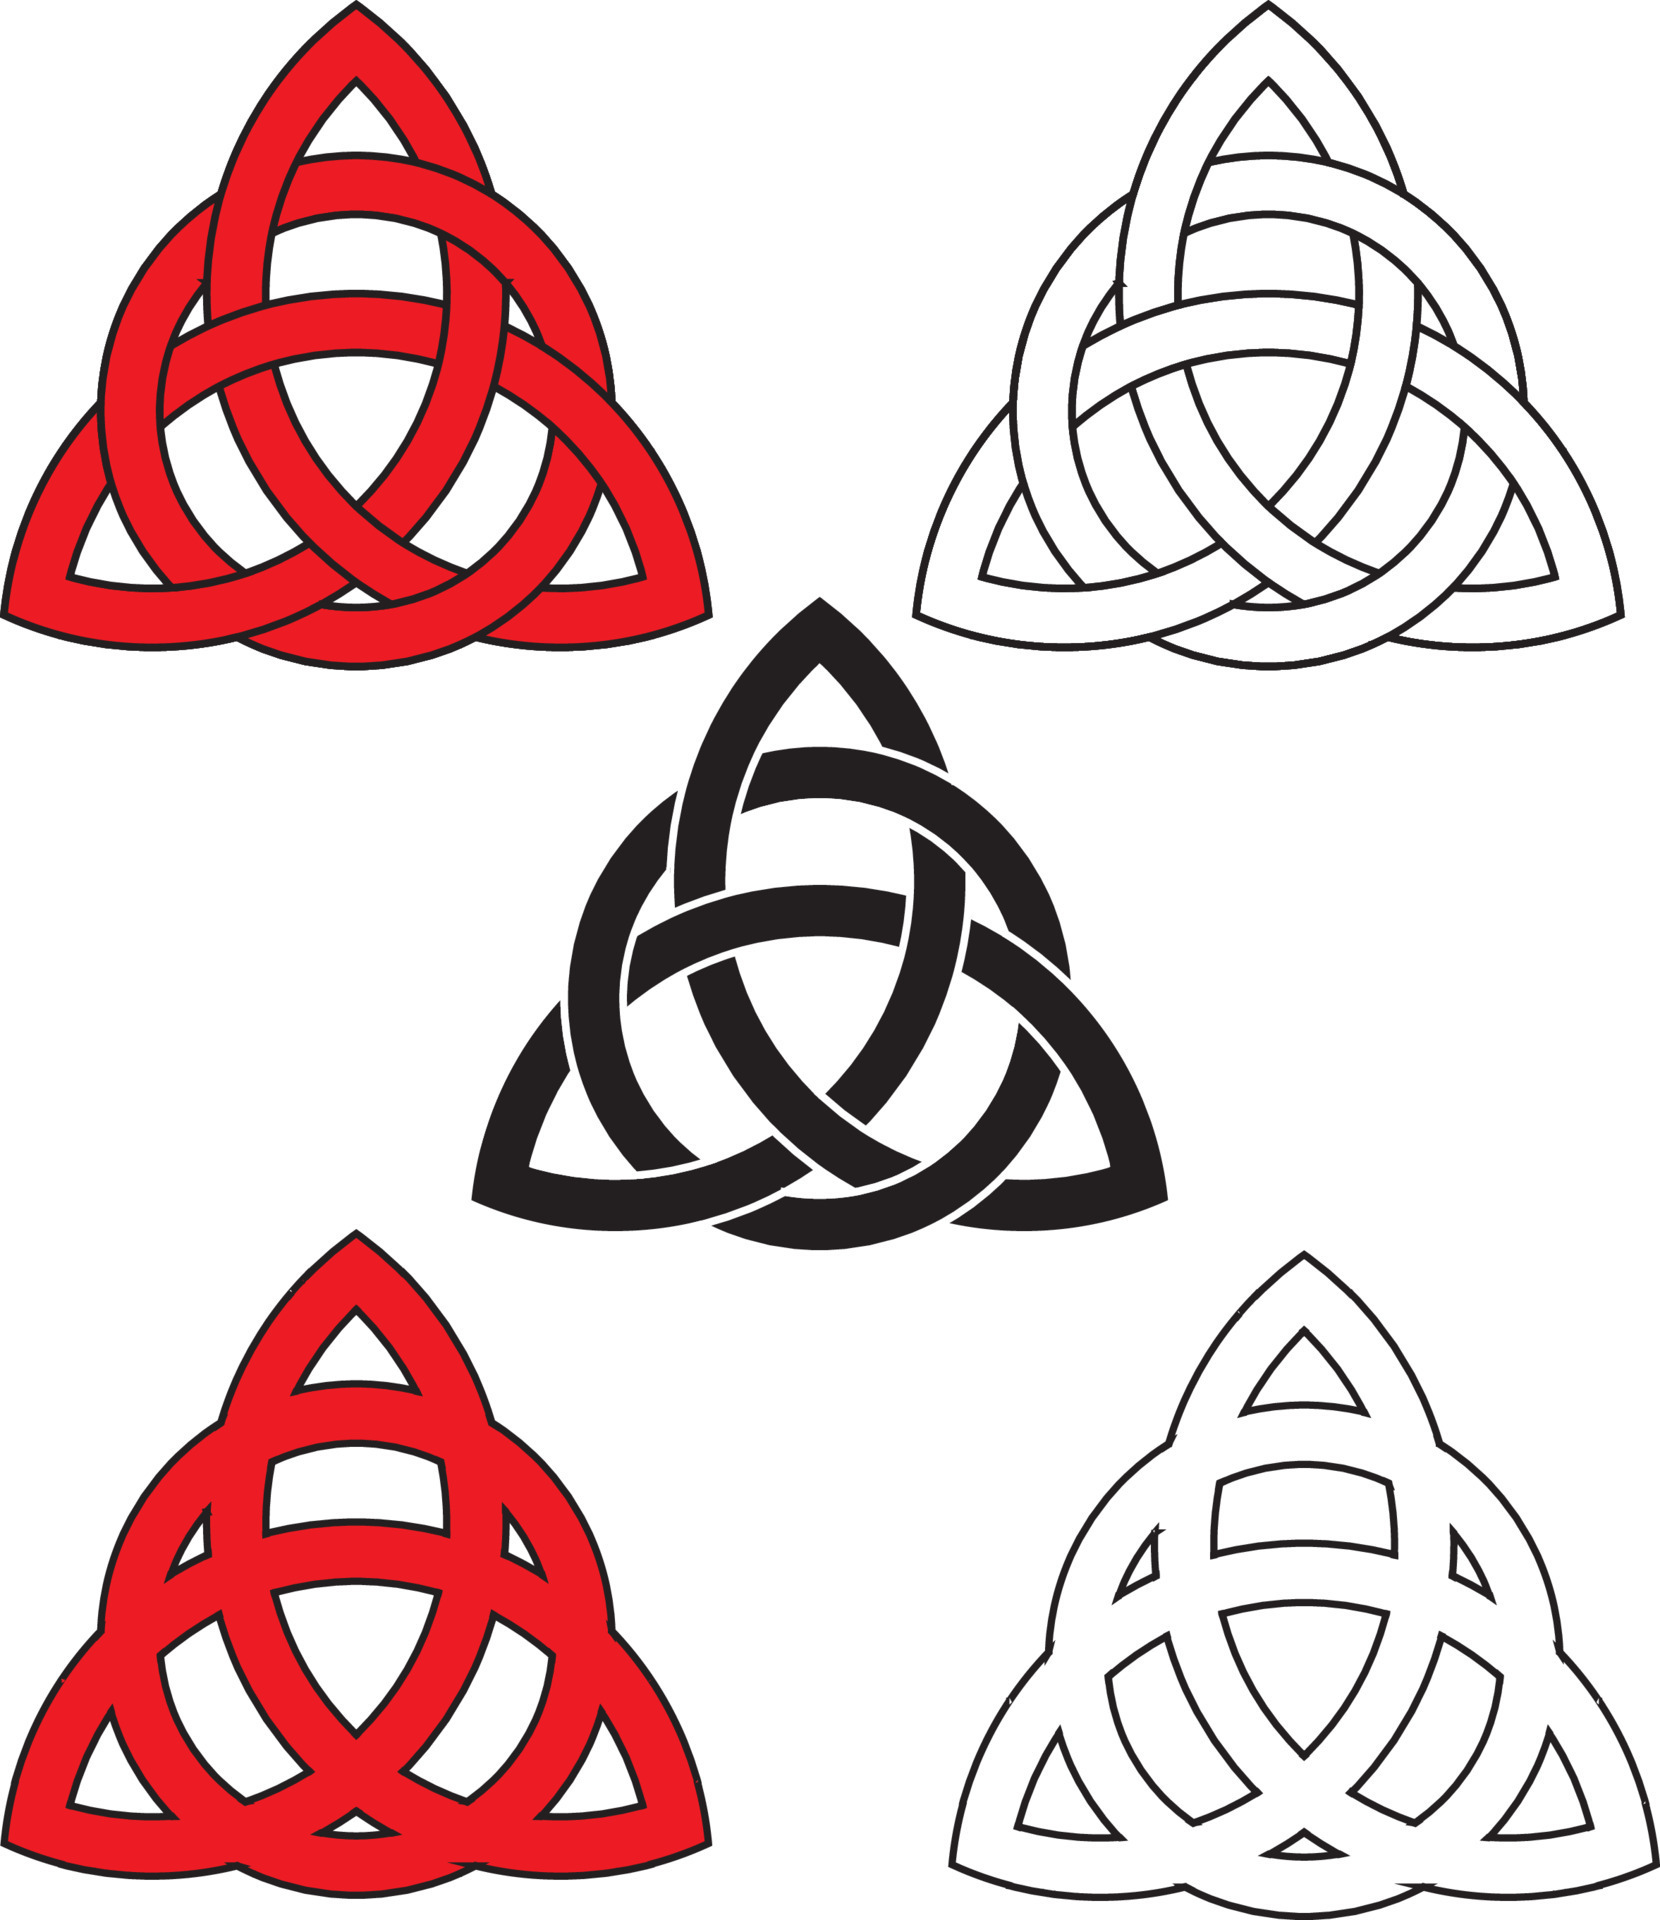 Celtic Triquetra Tattoo by TickleMeHoHo on DeviantArt